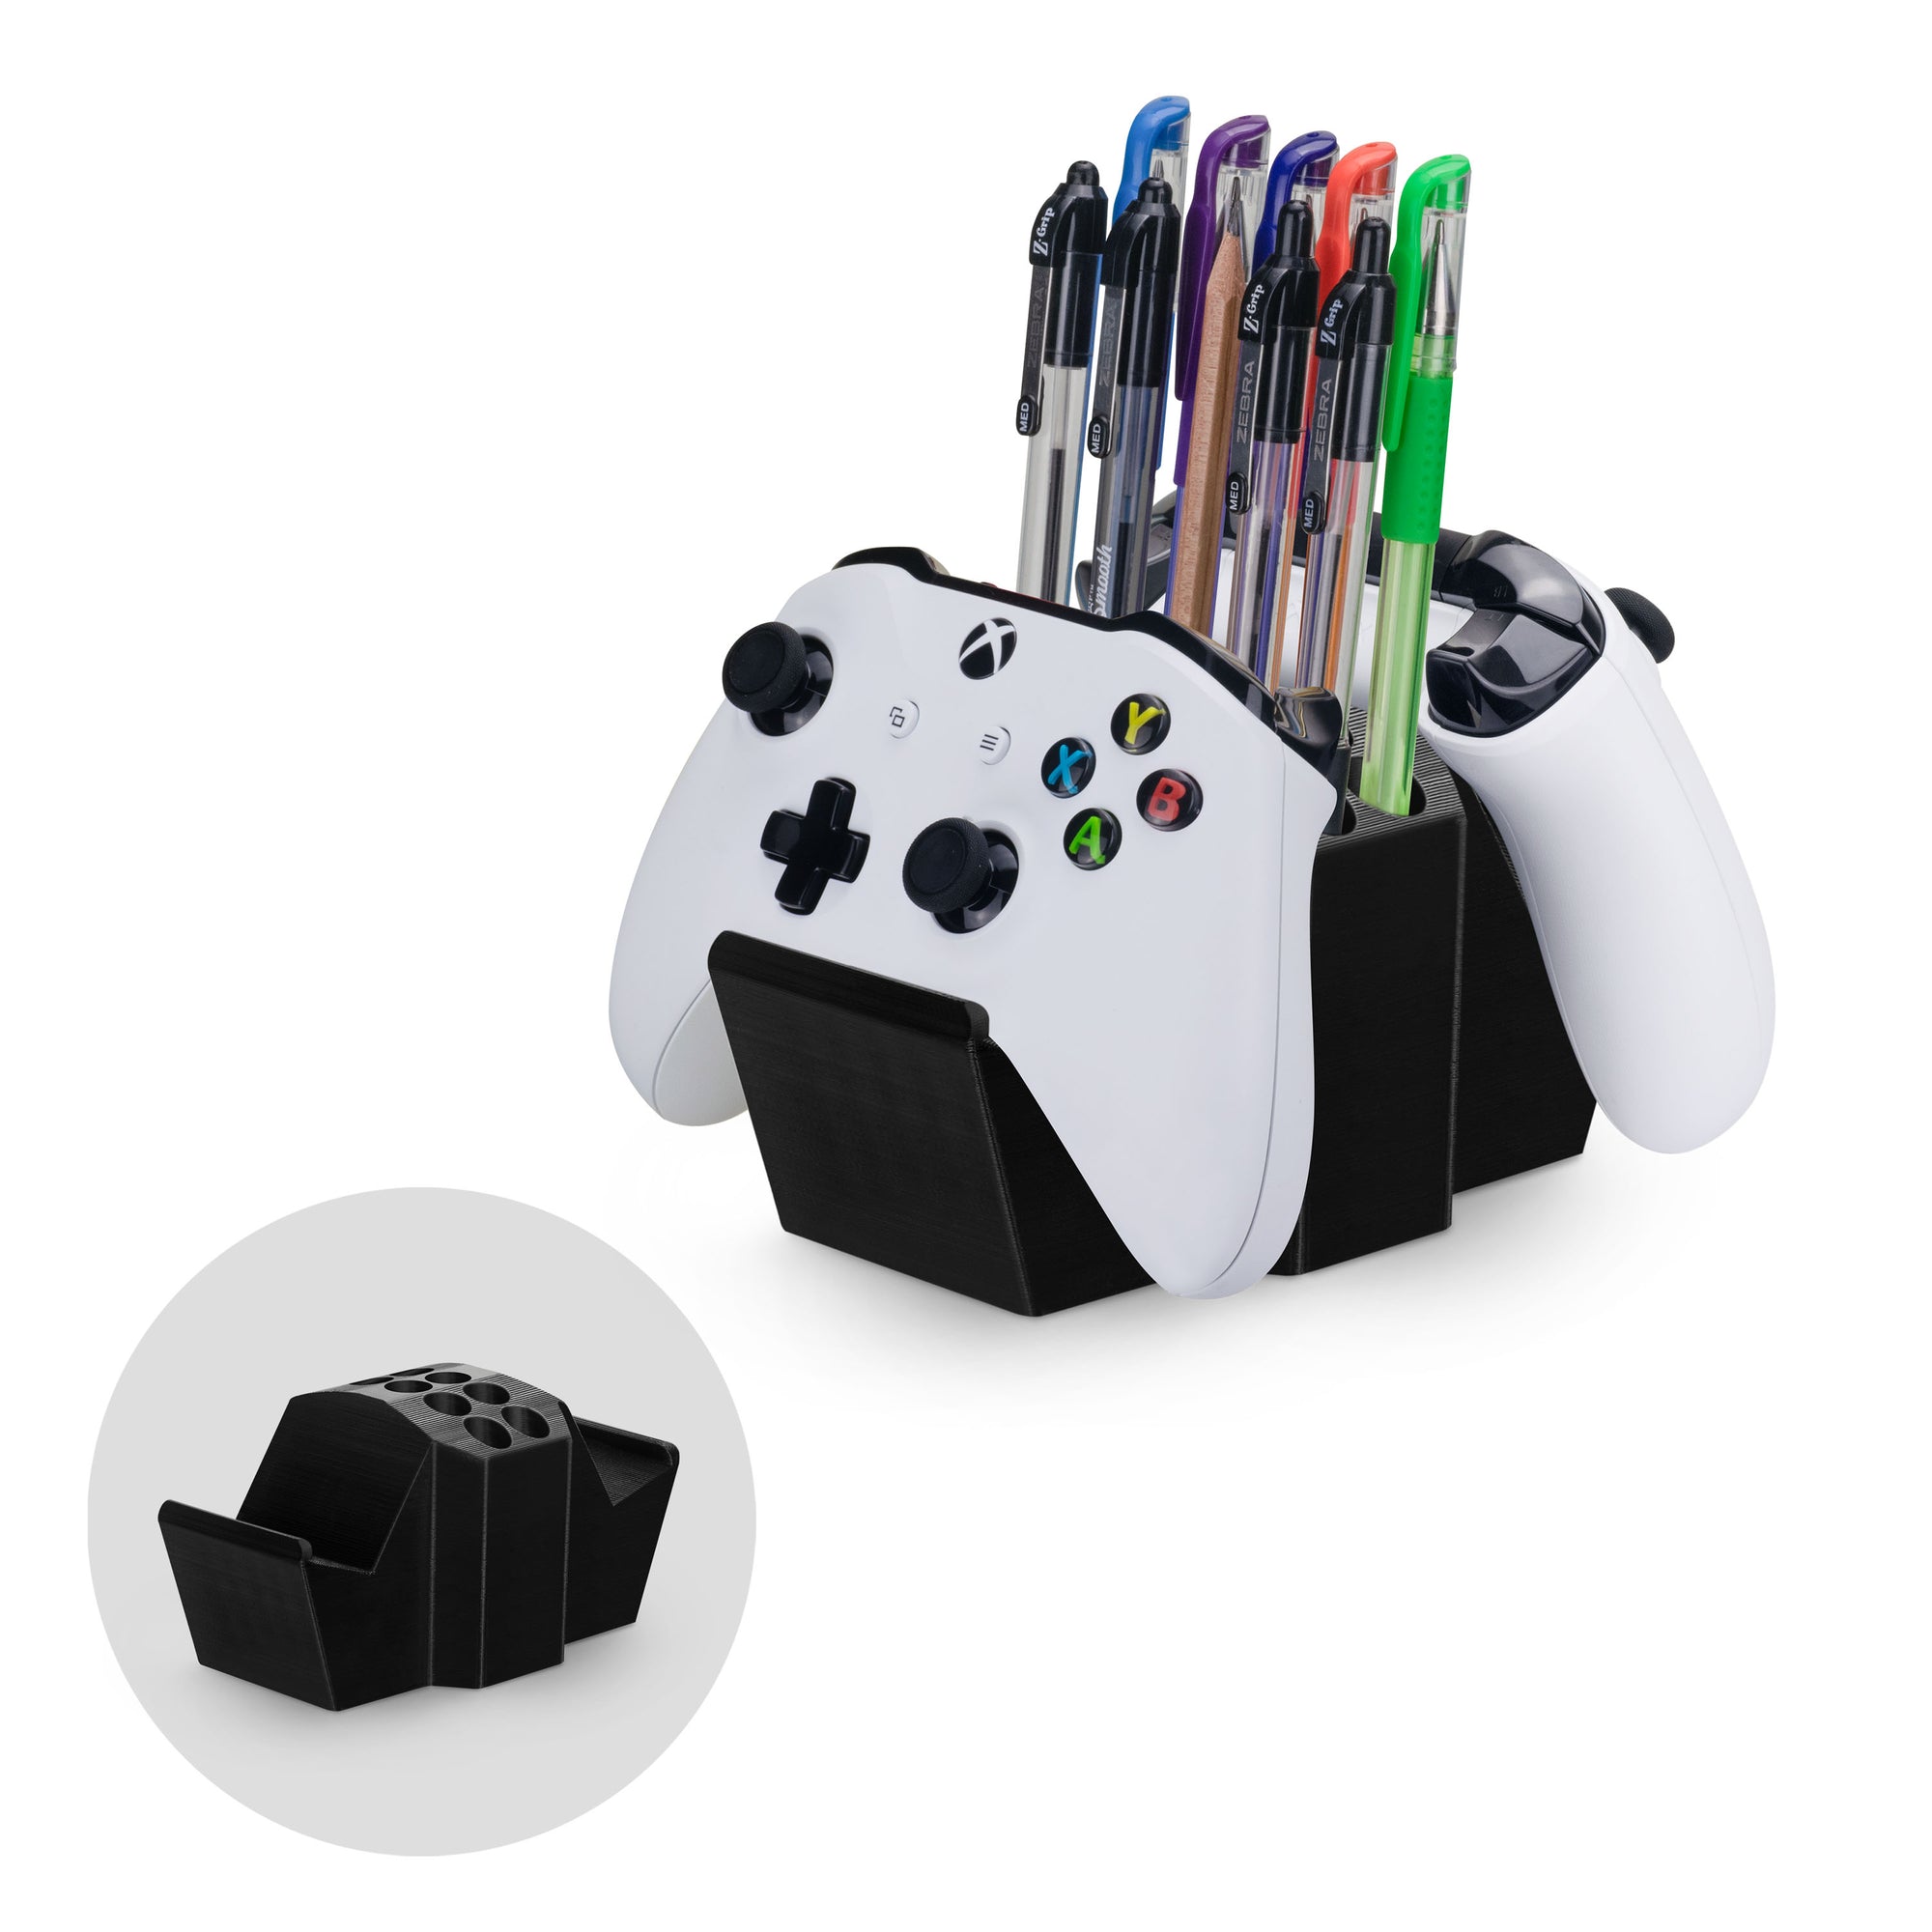 Game Controller Holder & Desktop Pen Organizer Stand With Ten Slots for Pens, Pencils, Stationery, Craft Tools & More - Universal Design for PS5 XBOX SERIES X ONE PS4 SWITCH PC Gamepads - D05